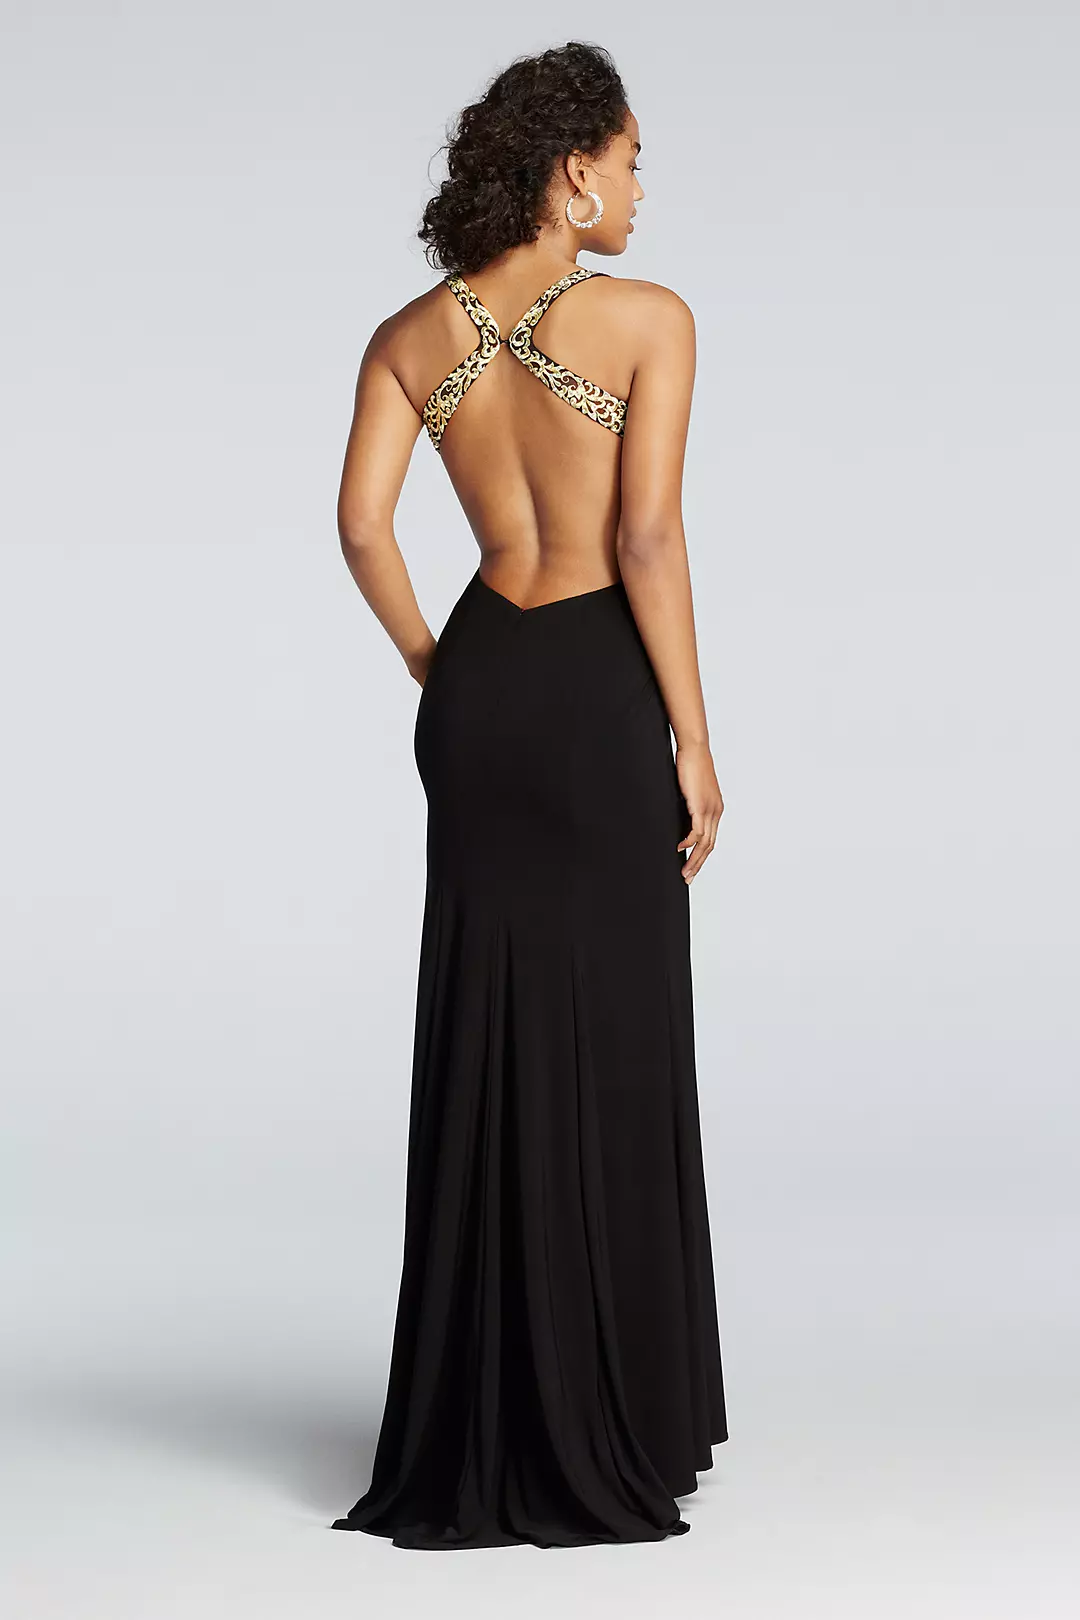 Beaded Cut Out Prom Dress with Side Slit Skirt | David's Bridal